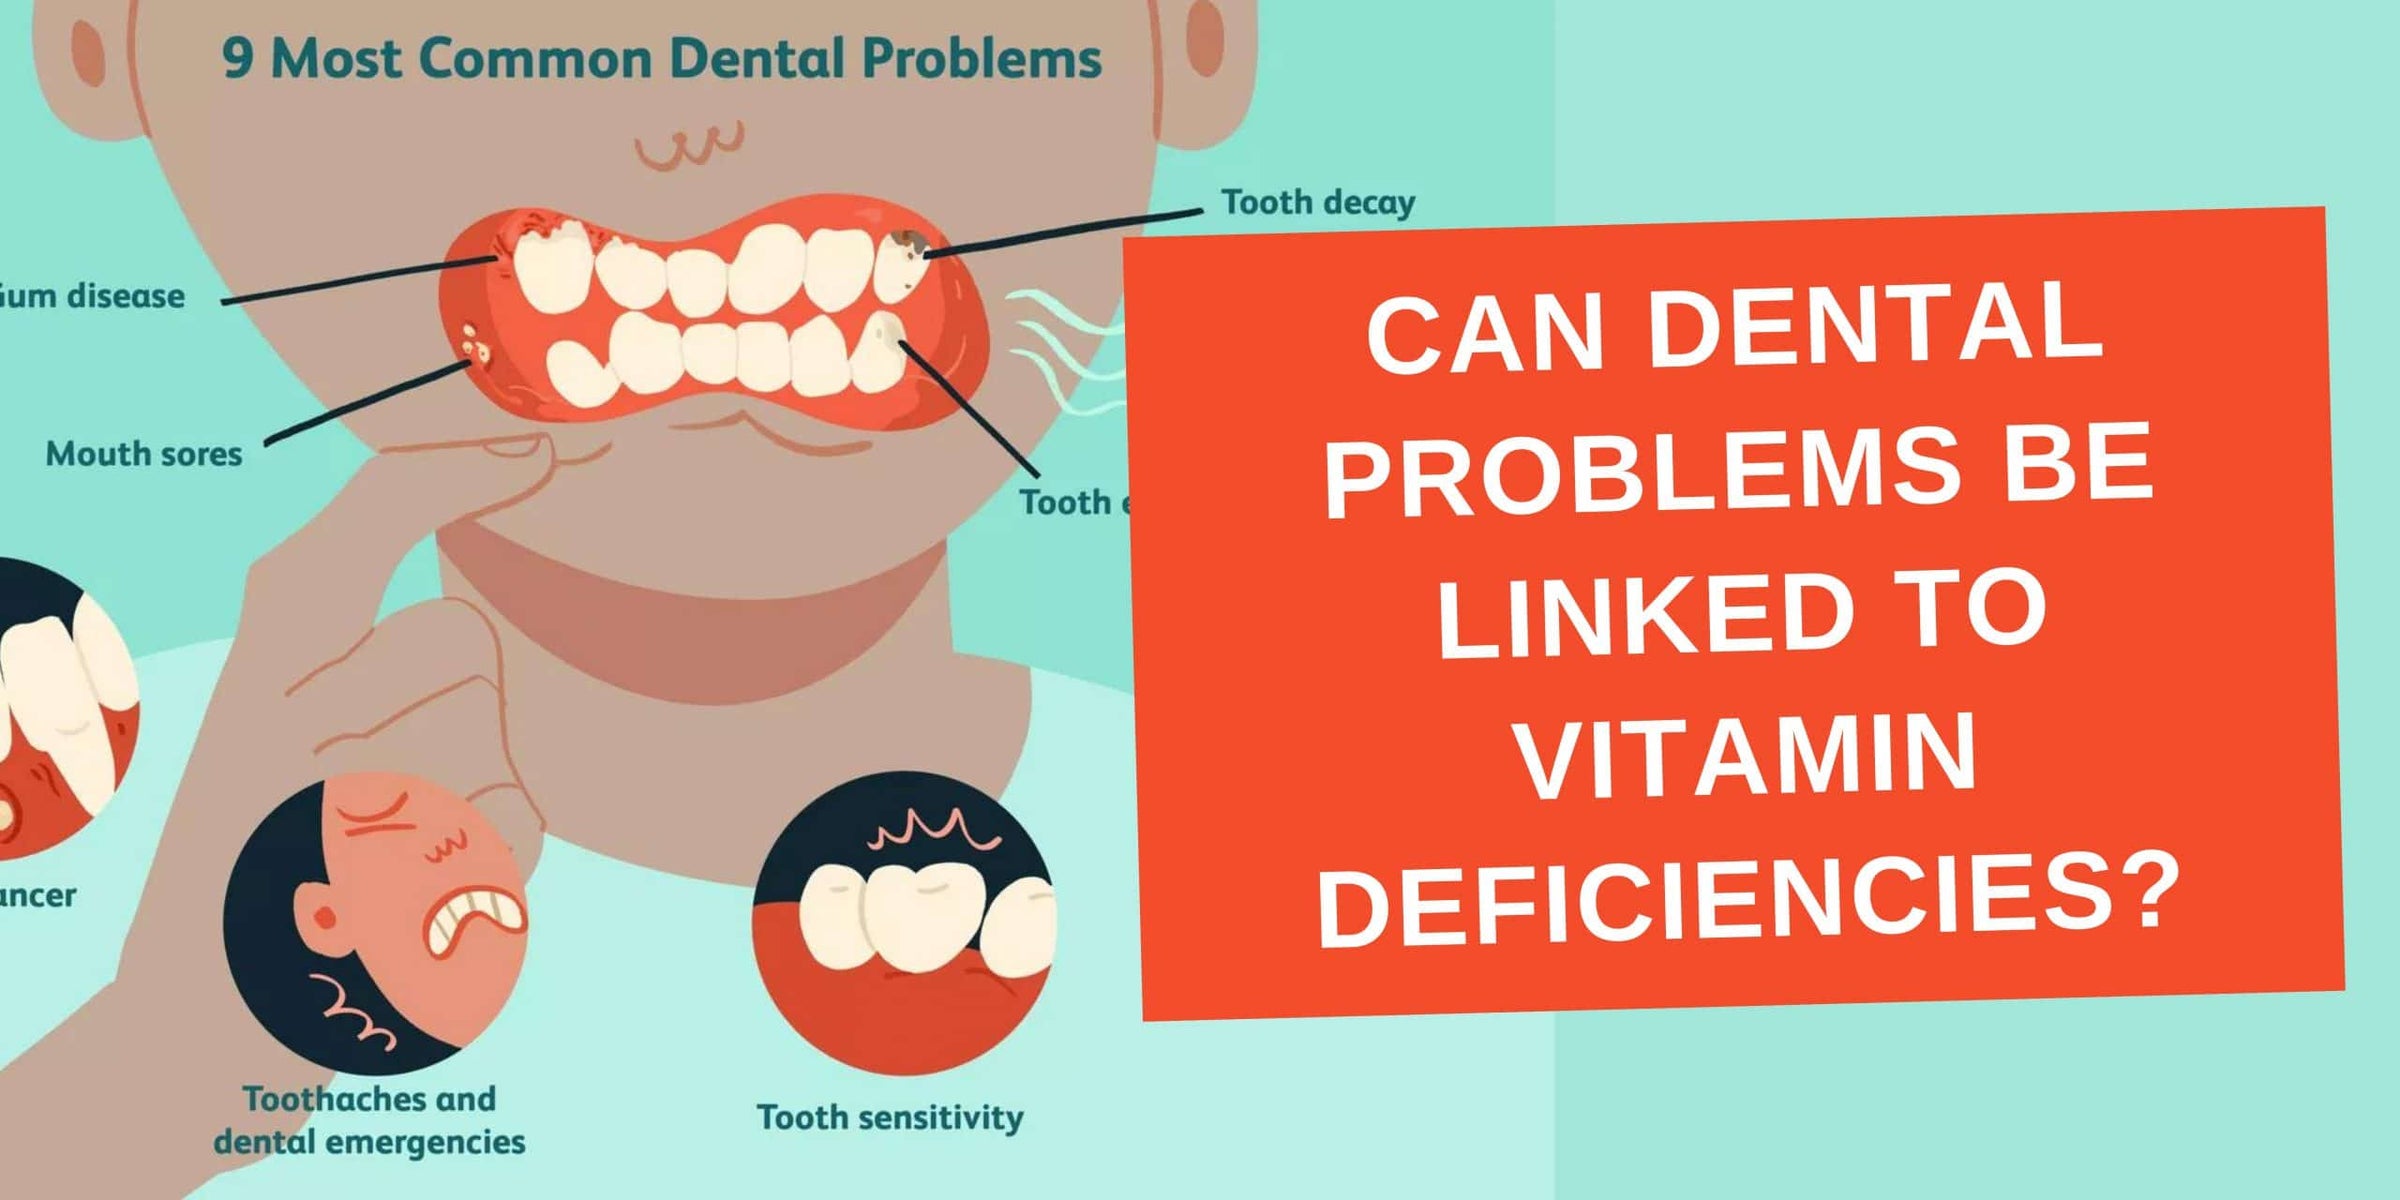 Can  Dental Problems be Linked to Vitamin Deficiencies? Image